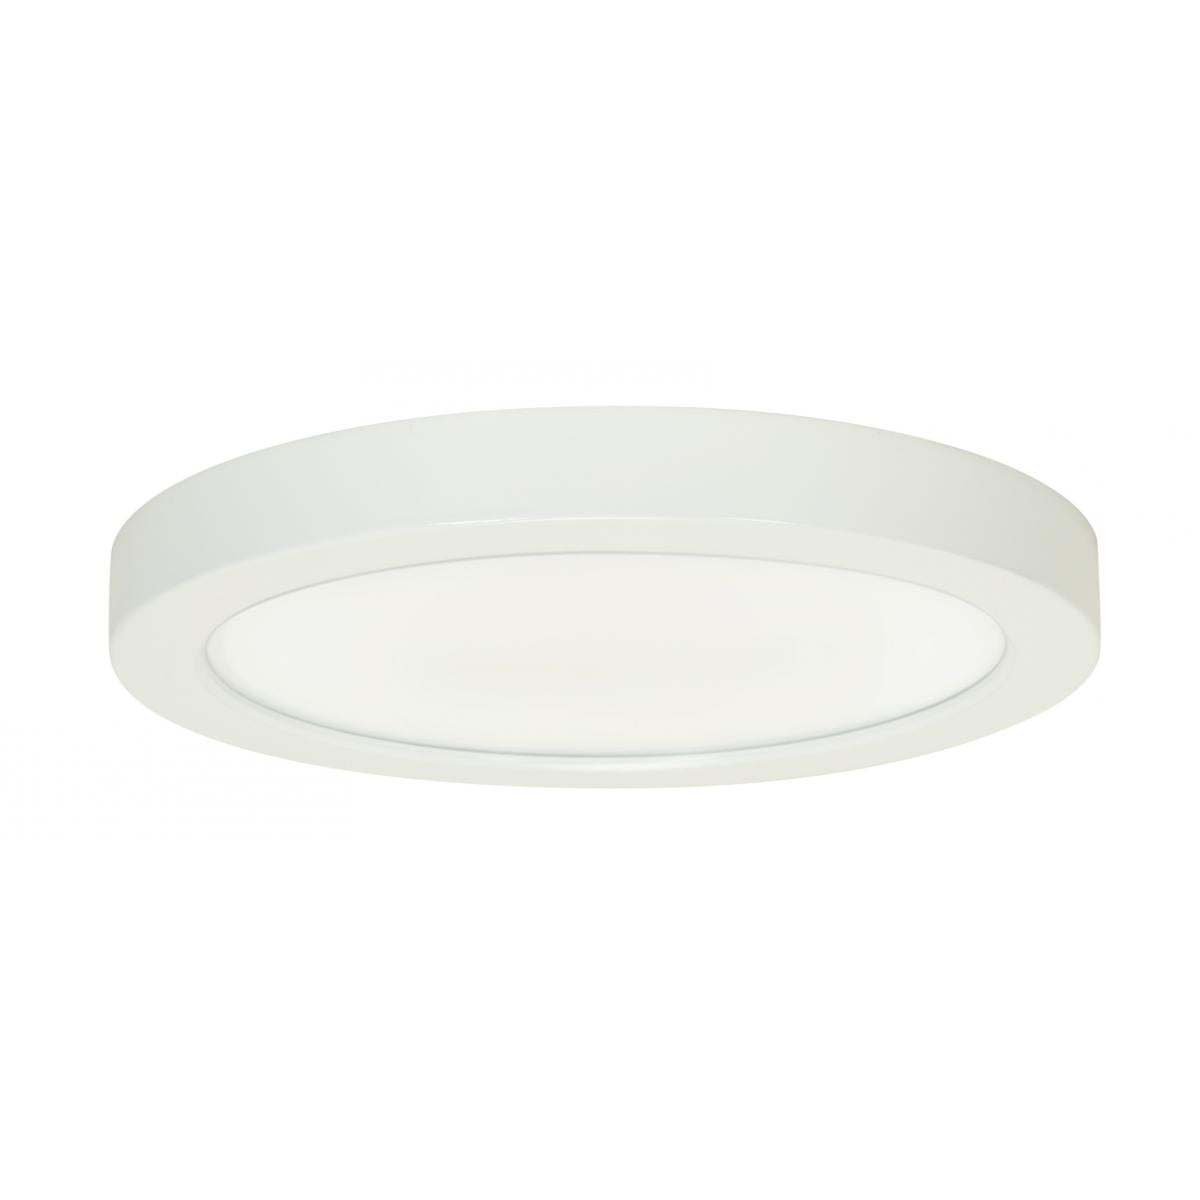 Replacement for Satco S29336 18.5 watt 9" Flush Mount LED Fixture 2700K Round Shape White Finish 120 volts - NOW 62-1720